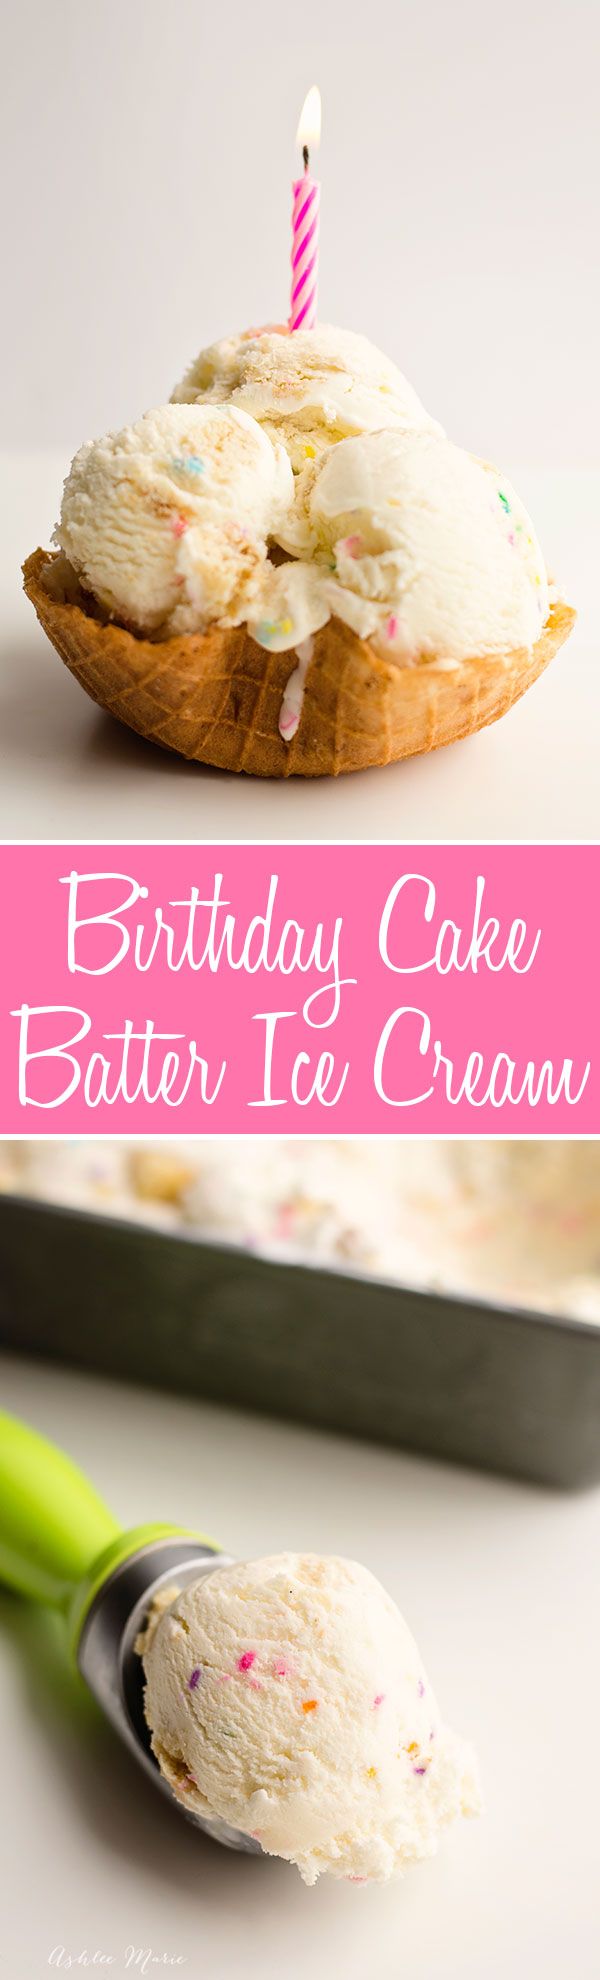 one of my favorite ice cream flavors is cake batter ice cream, made with dry cake mix and mixed with pieces of white cake and sprinkles it is always a hit